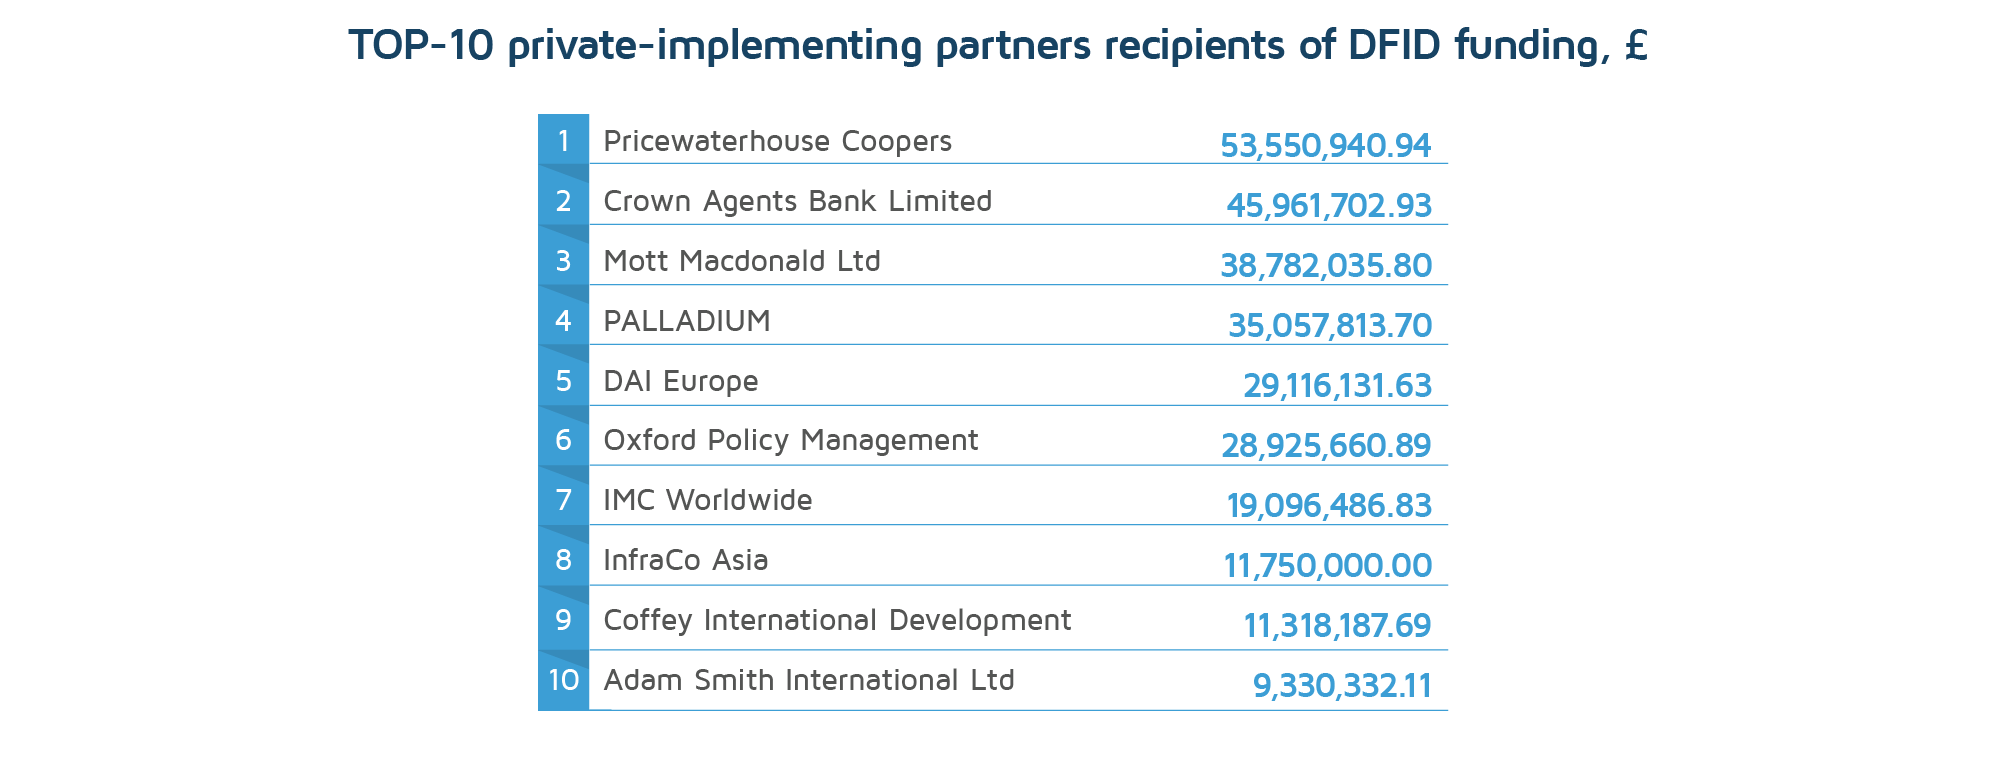 TOP-10 private-implementing partners recipients of DFID funding, 2020